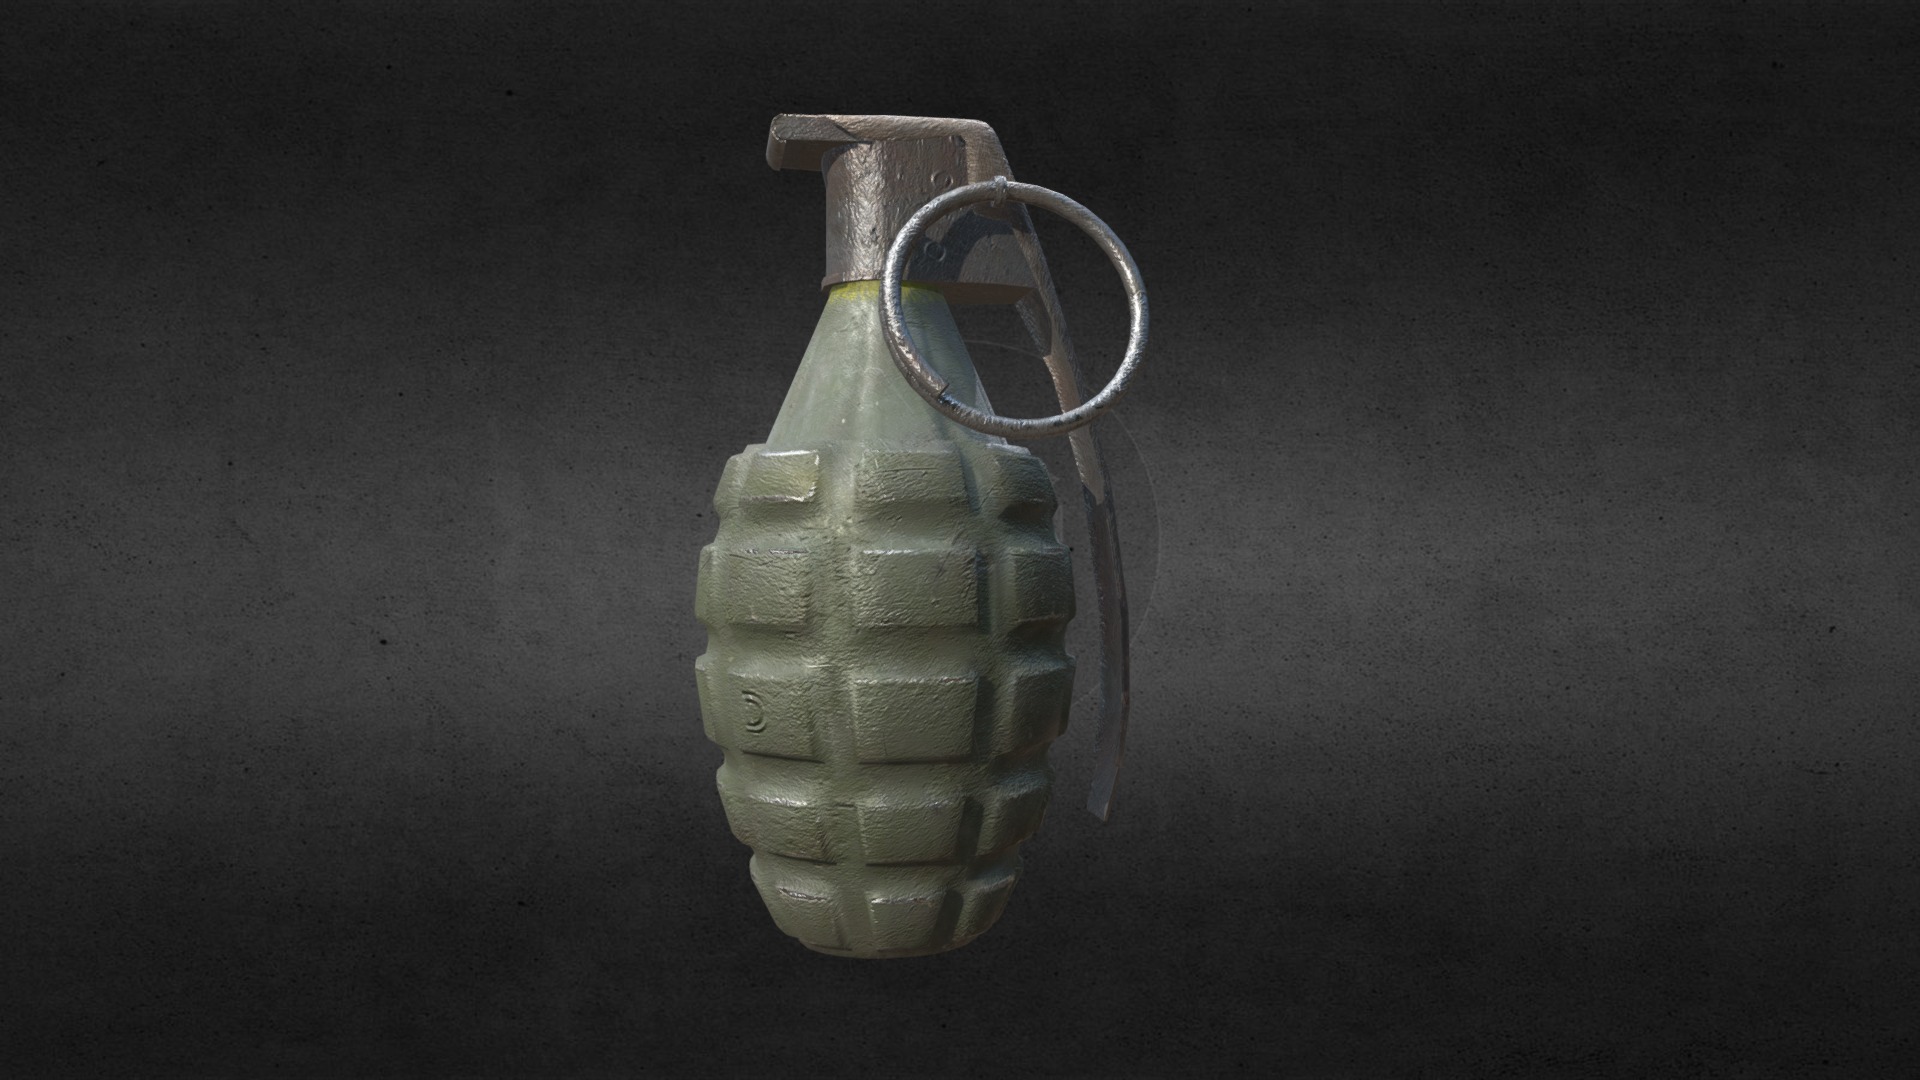 3D model M2 grenade - This is a 3D model of the M2 grenade. The 3D model is about a stack of money.